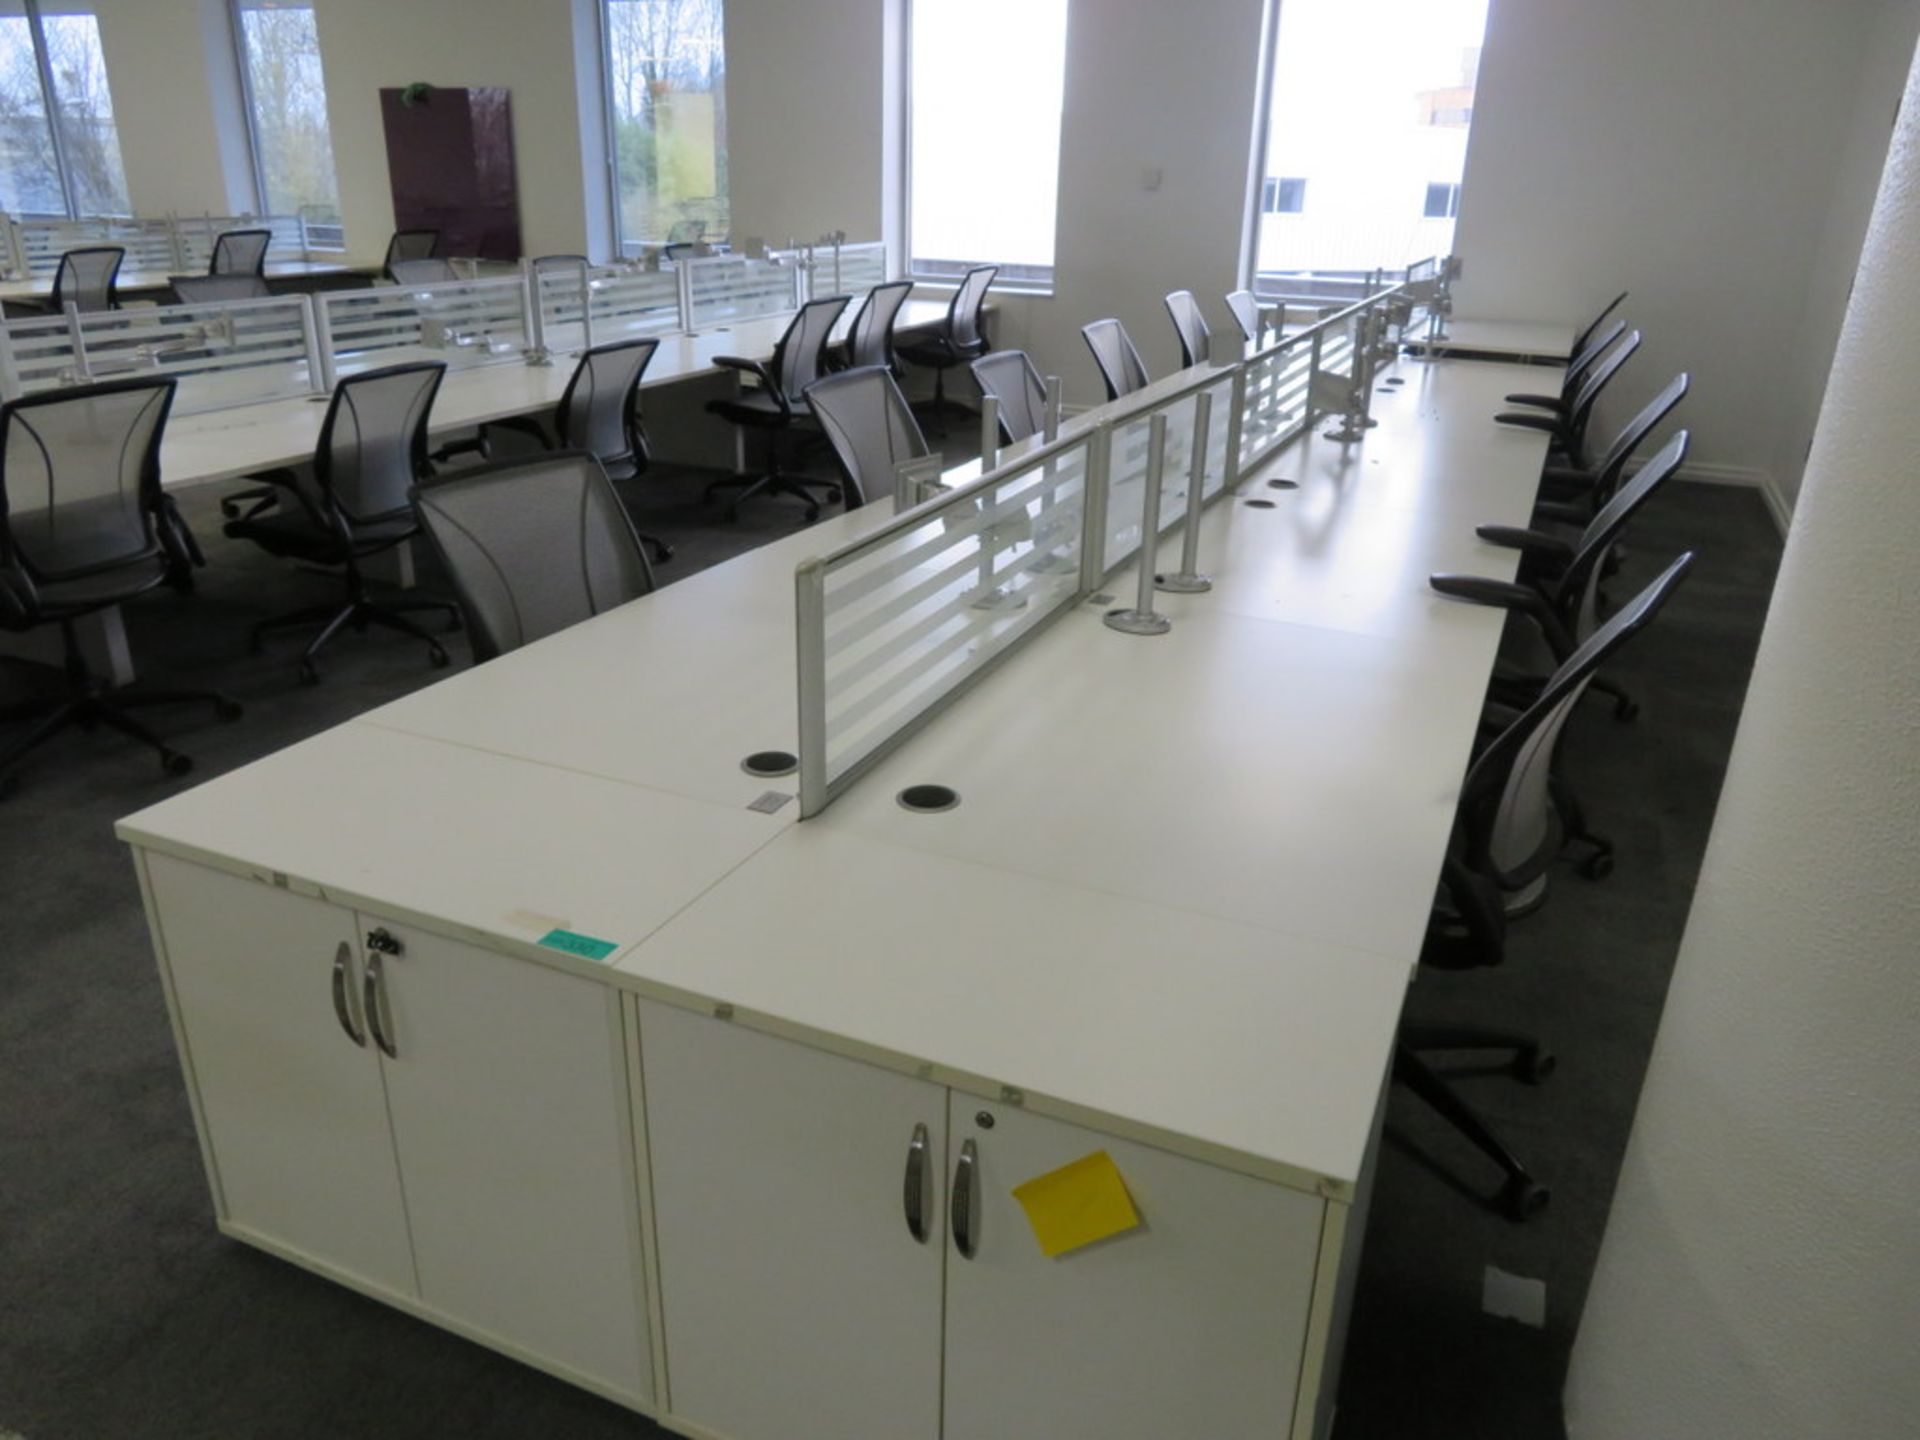 12 Person Desk Arrangement With Dividers, Monitor Arms & Storage Cupboards. Chairs Are Not Included.